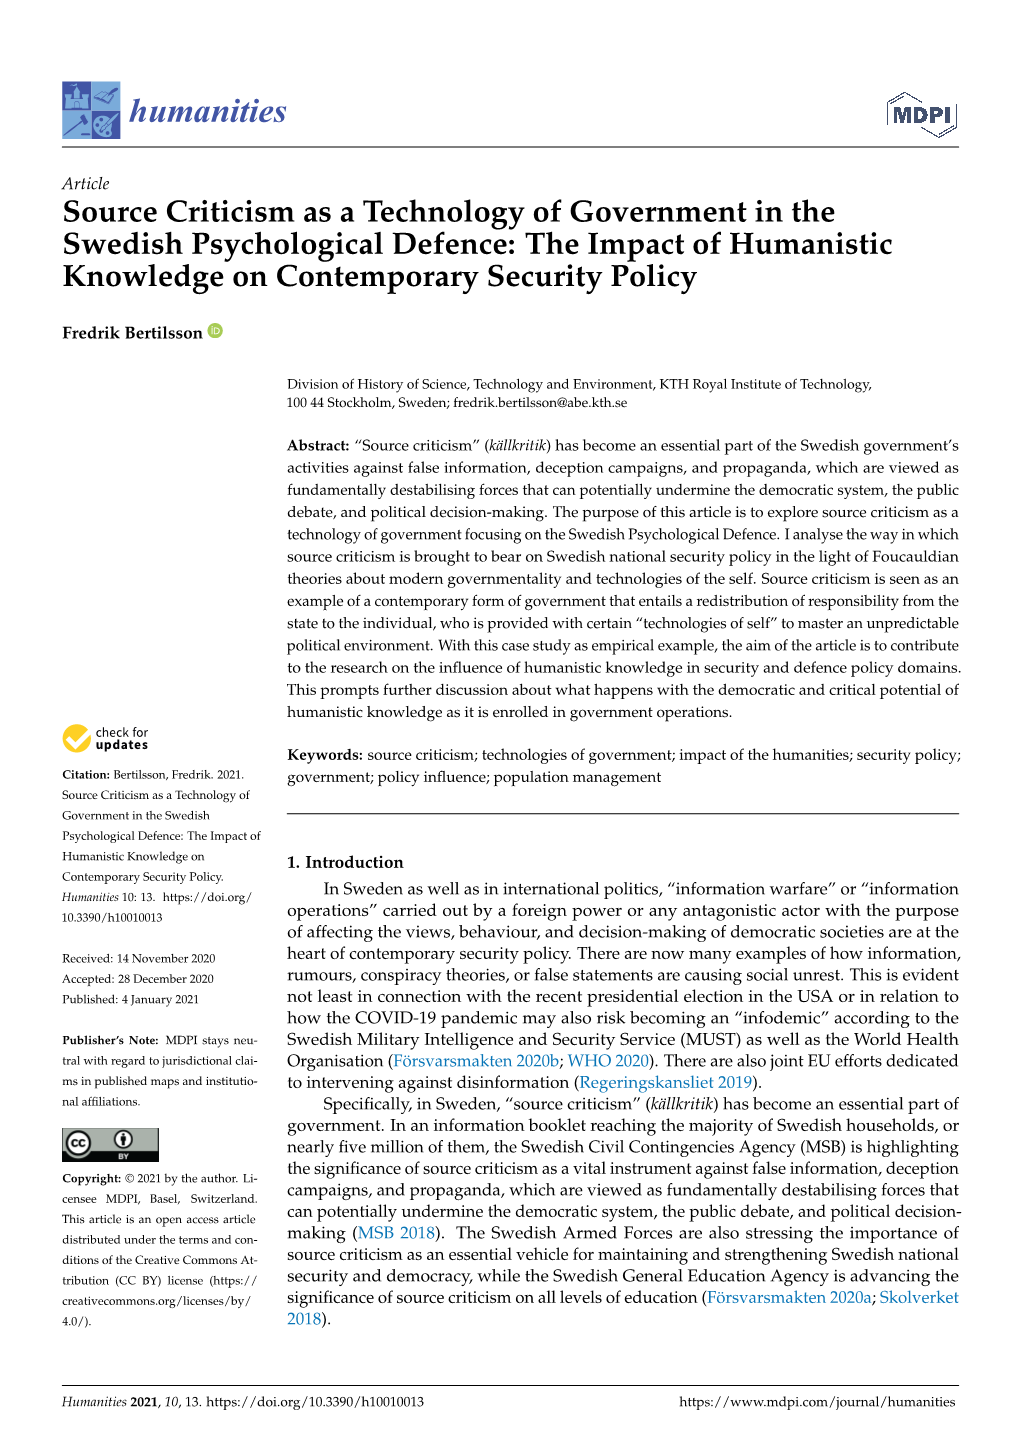 Source Criticism As a Technology of Government in the Swedish Psychological Defence: the Impact of Humanistic Knowledge on Contemporary Security Policy